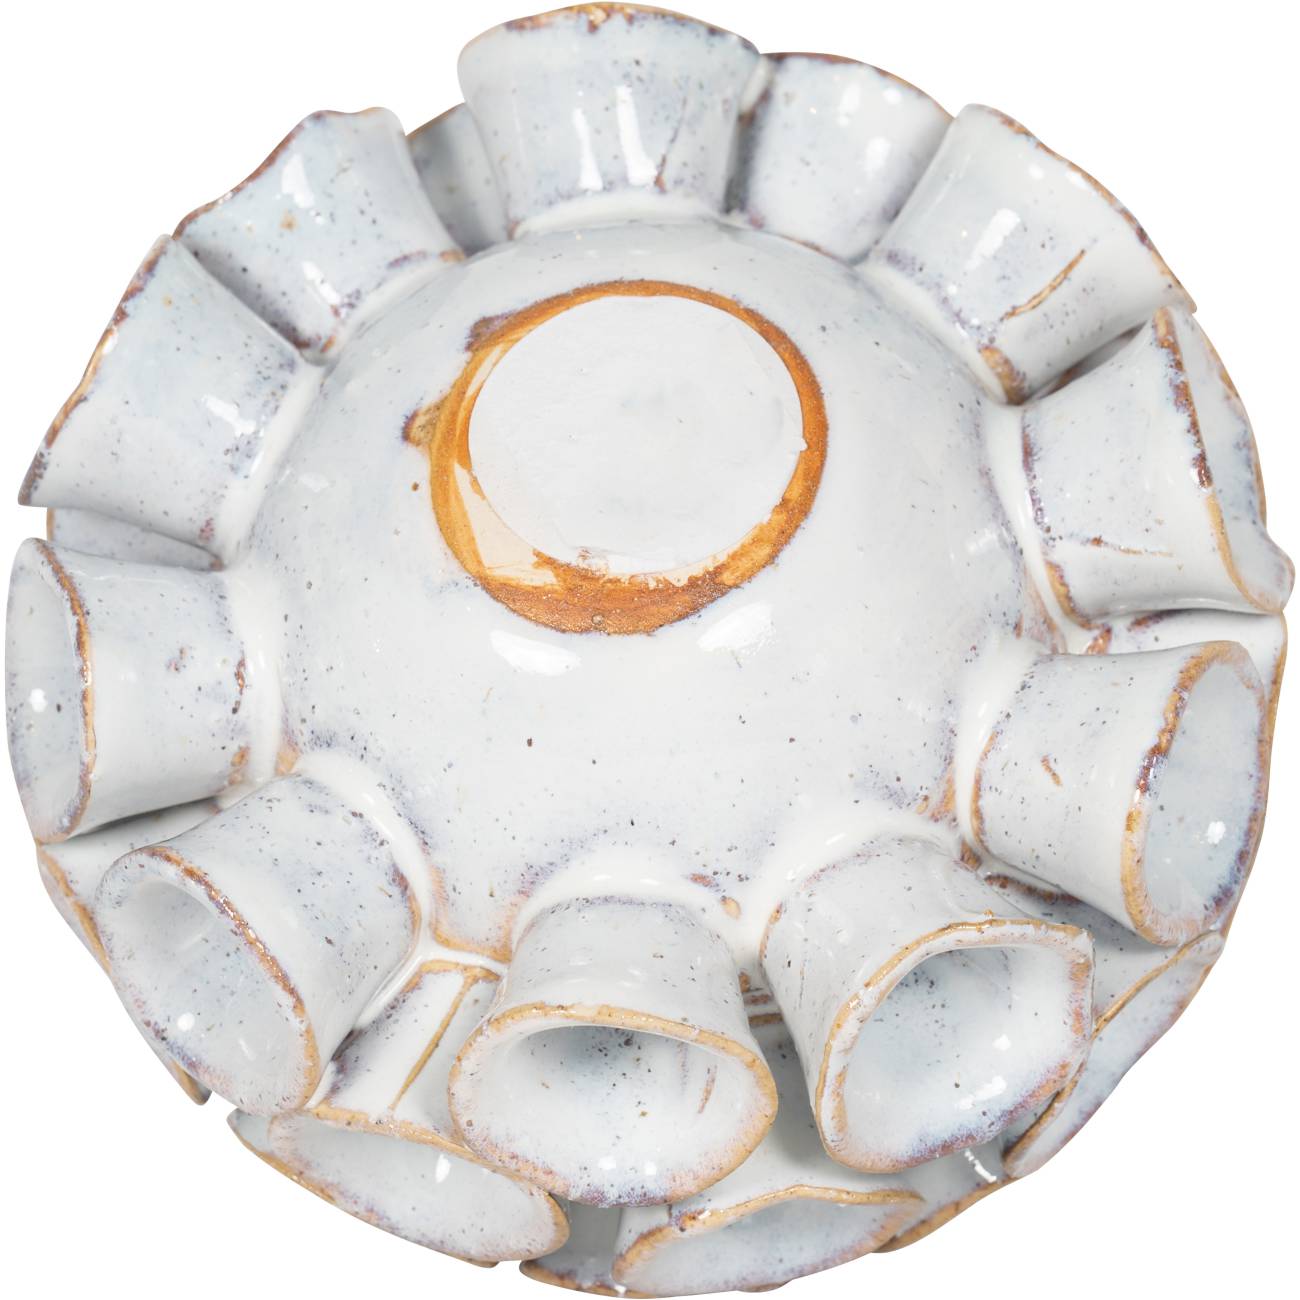 Aged White Ceramic Ornament - Vintage Elegance for Timeless Decor. Adds Character and Charm to Any Space